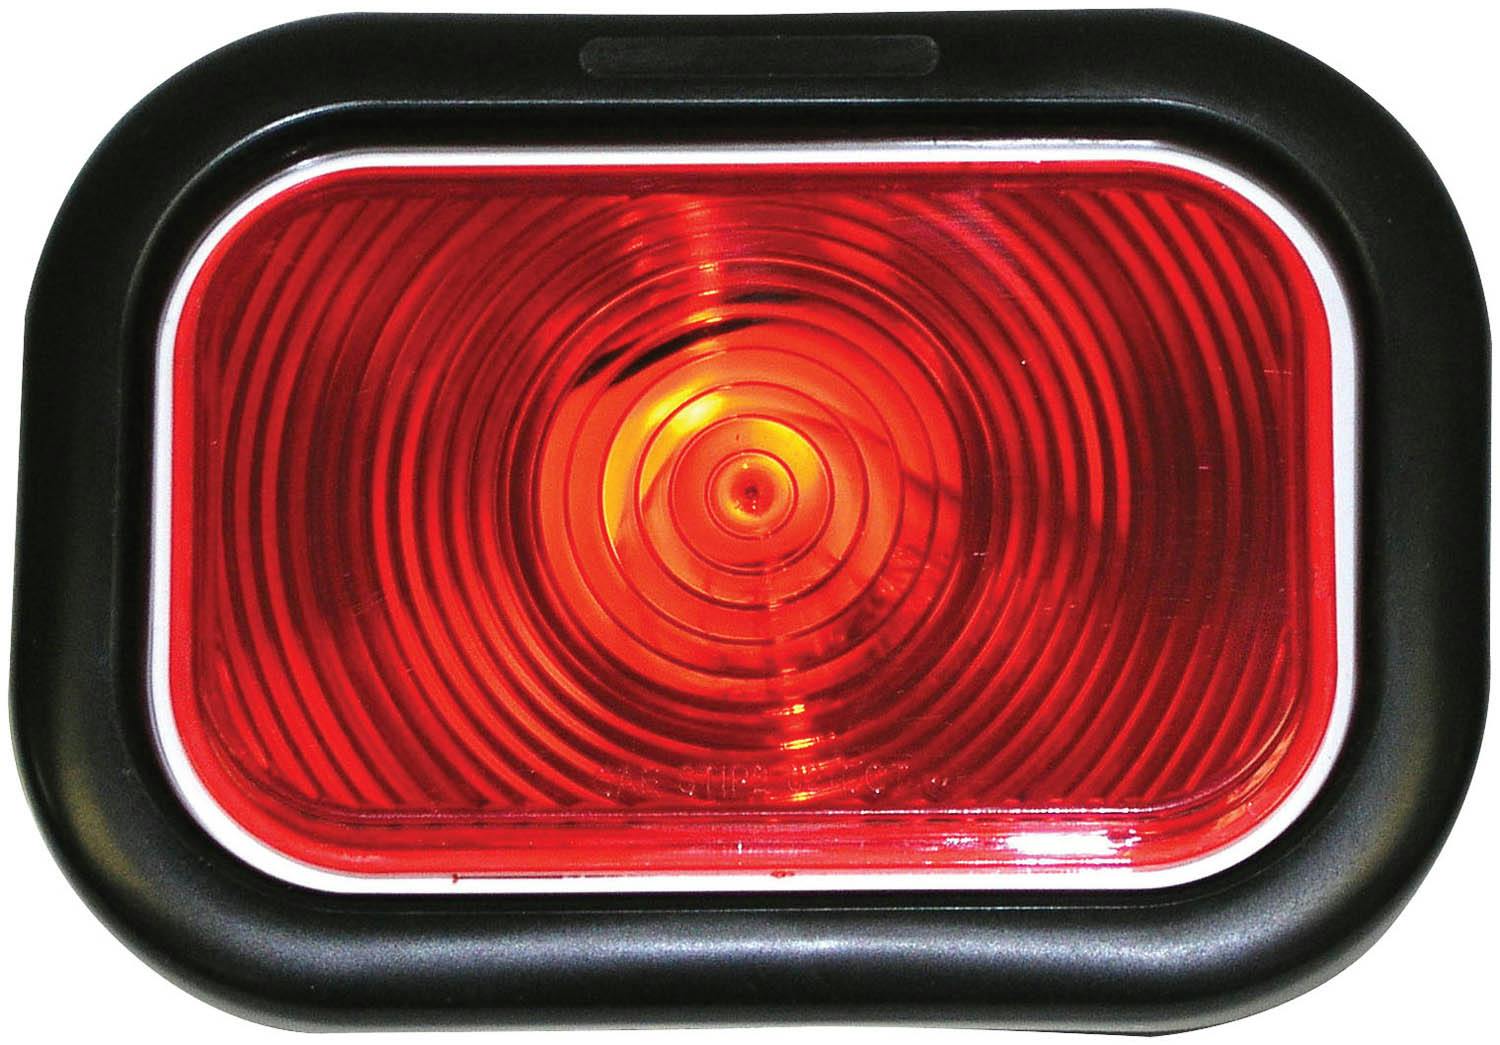 Incandescent Stop/Turn/Tail, Rectangular, 3.4375"X5.3125", red, bulk pack (Pack of 50)